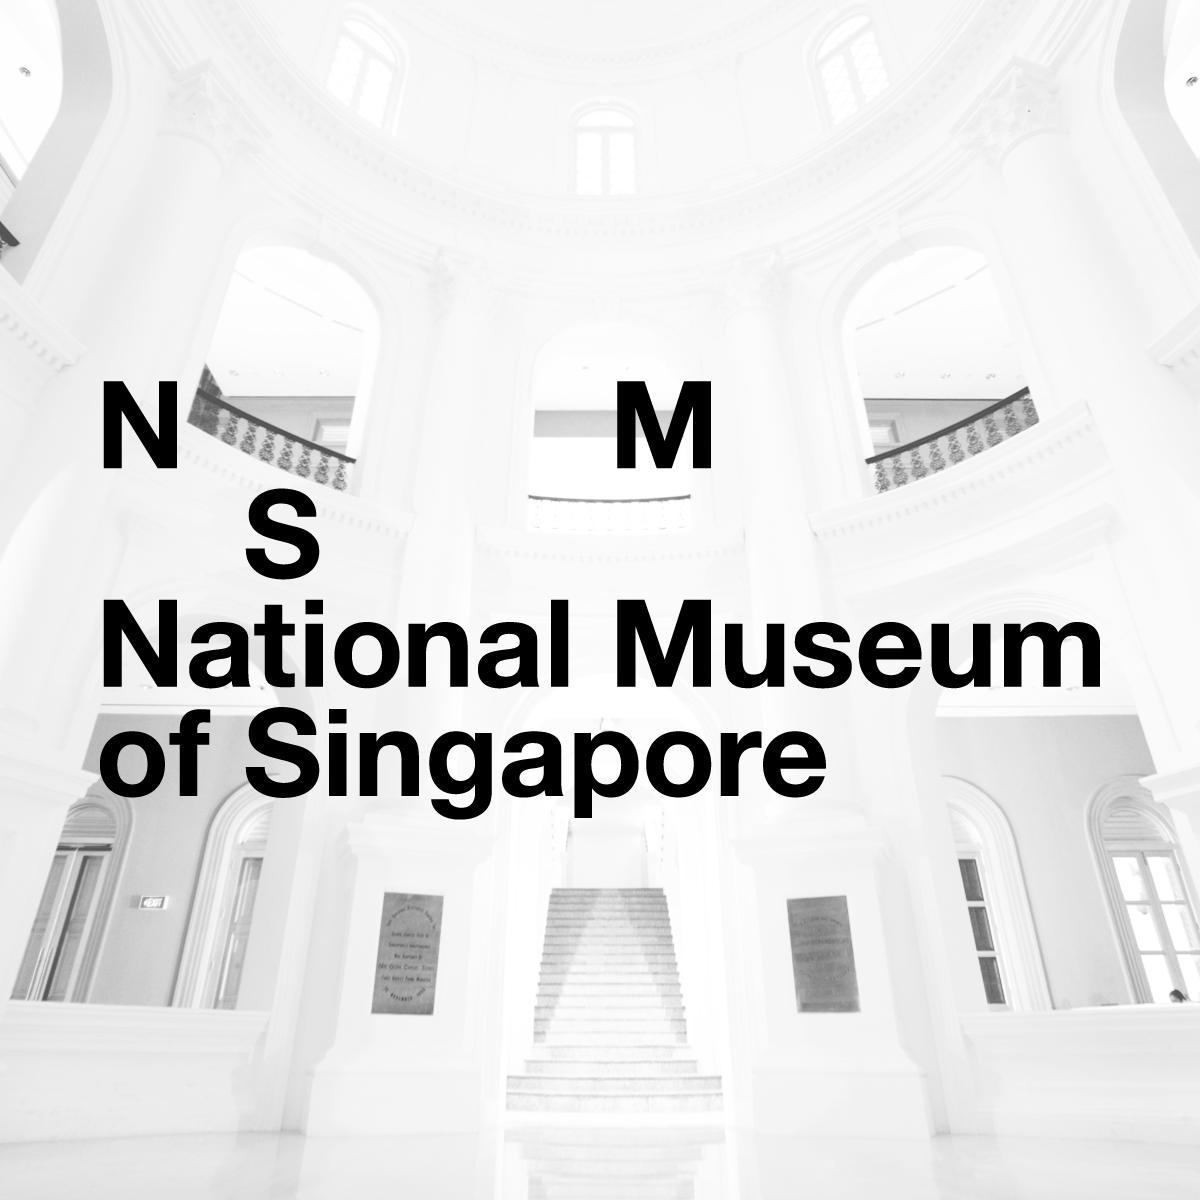 Anne-Cécile Worms, Co-founder of ArtJaws, invited by the National Museum of Singapore for a series of lectures